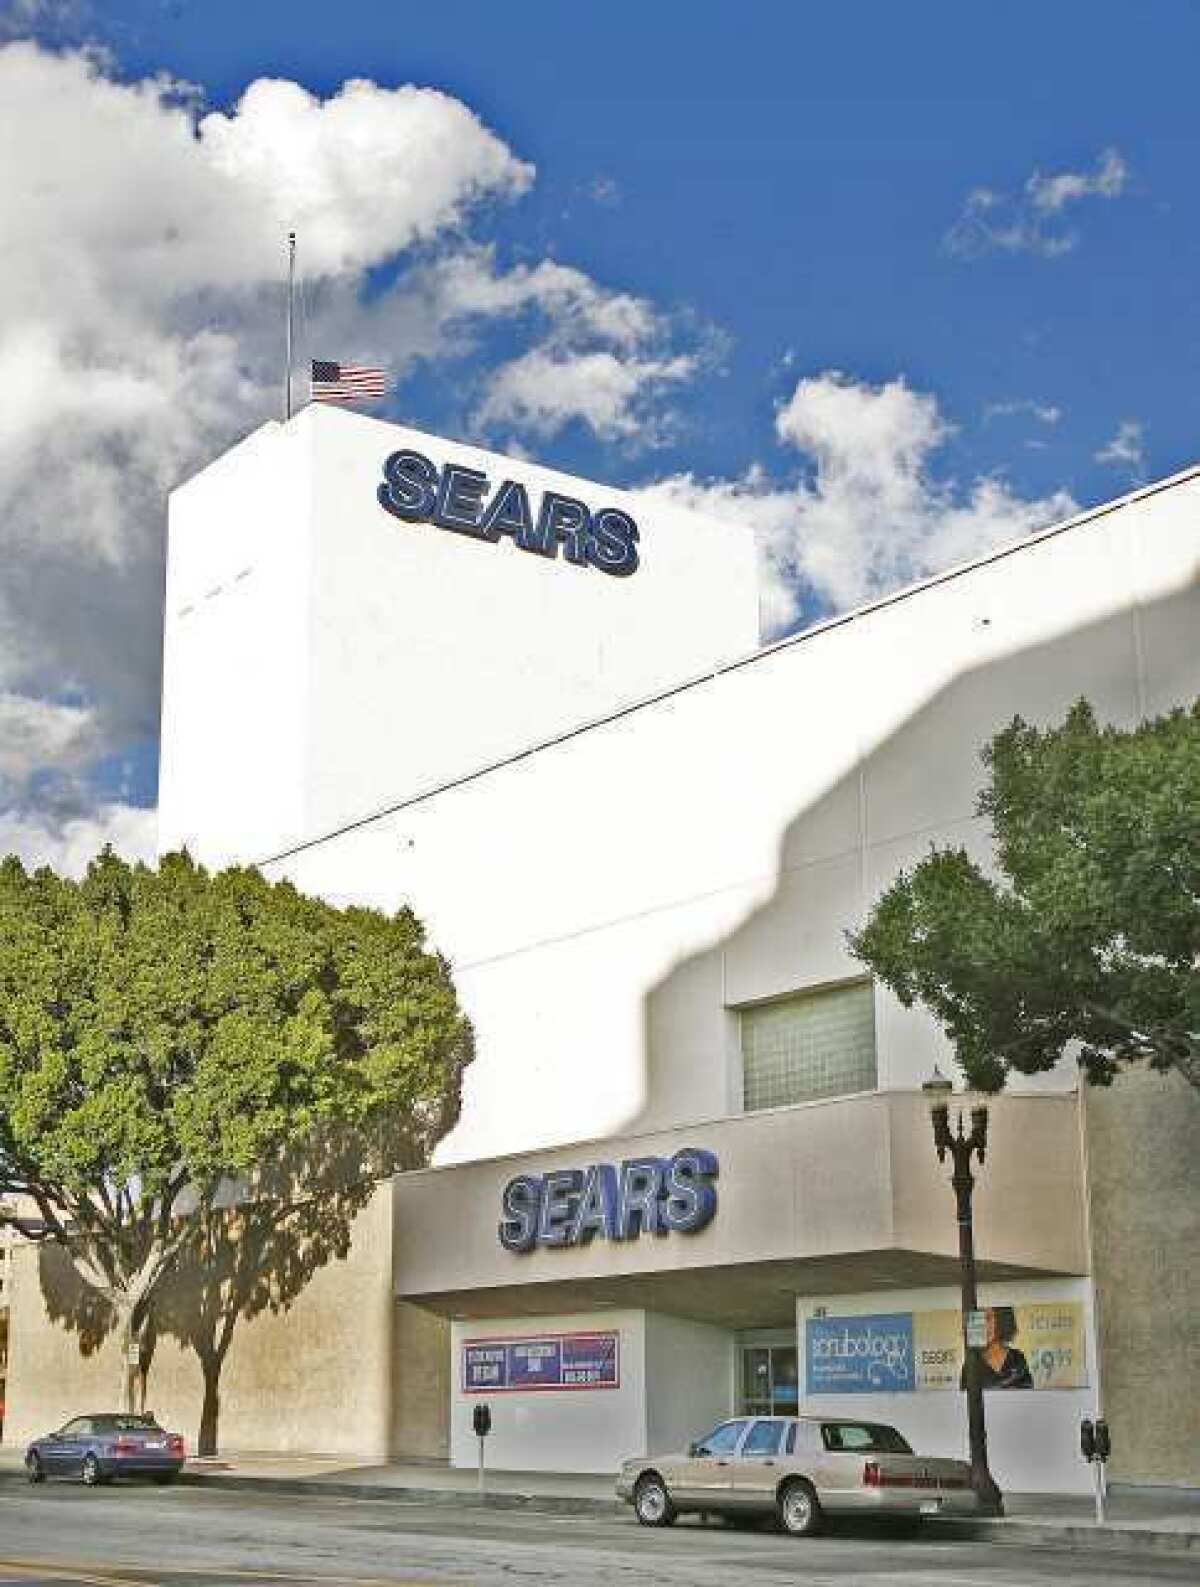 Sears, in Glendale, is being asked by the Glendale City Council to improve the facade of the store's front entrance. Glendale Councilwoman Laura Friedman complained last week that the store looks vacant and "dangerous."